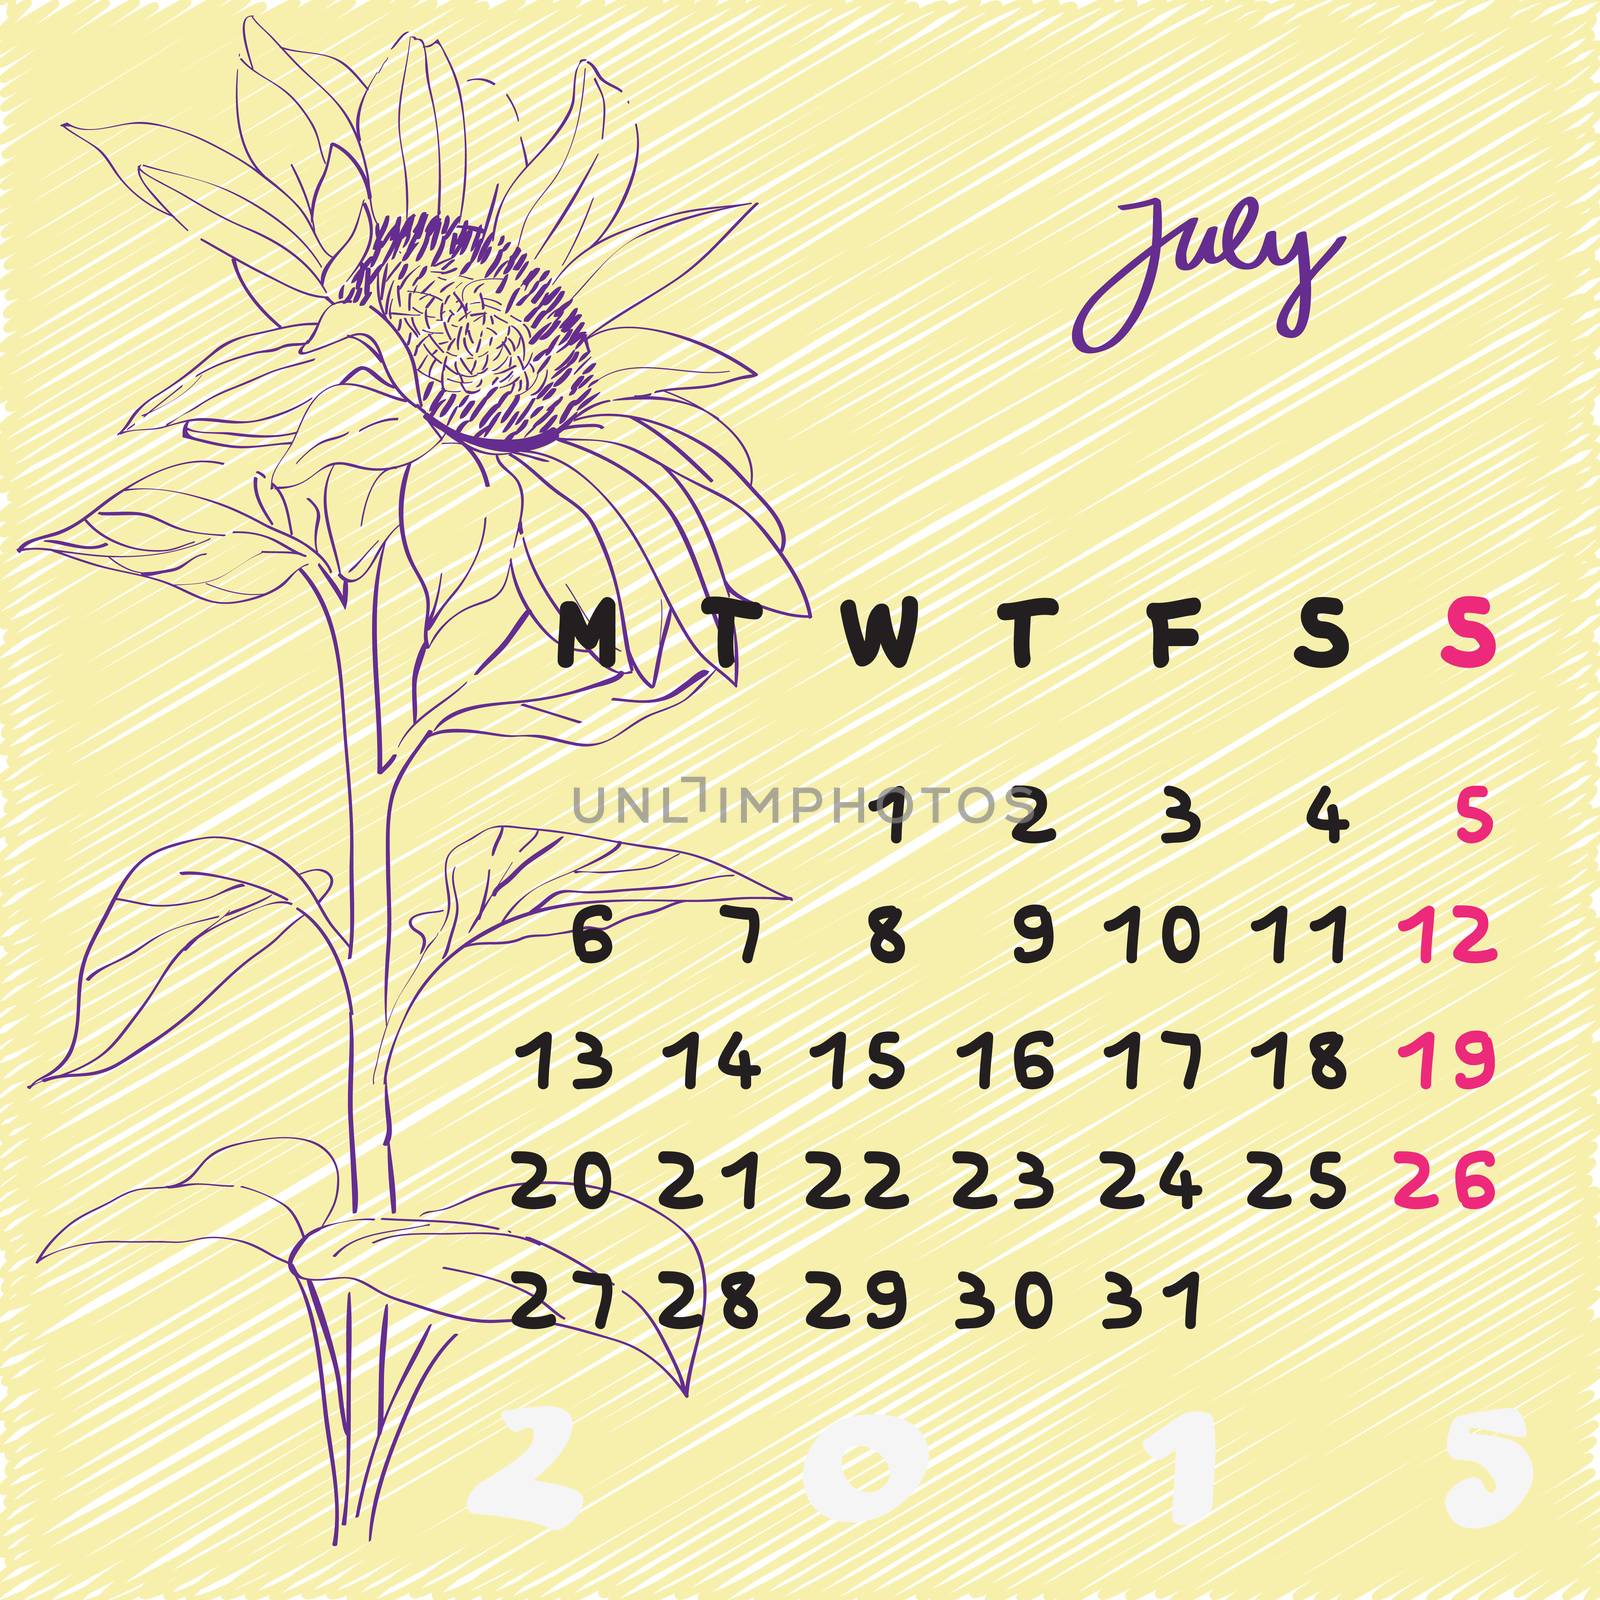 Calendar 2015, graphic illustration of July month calendar with original hand drawn text and sunflower sketch